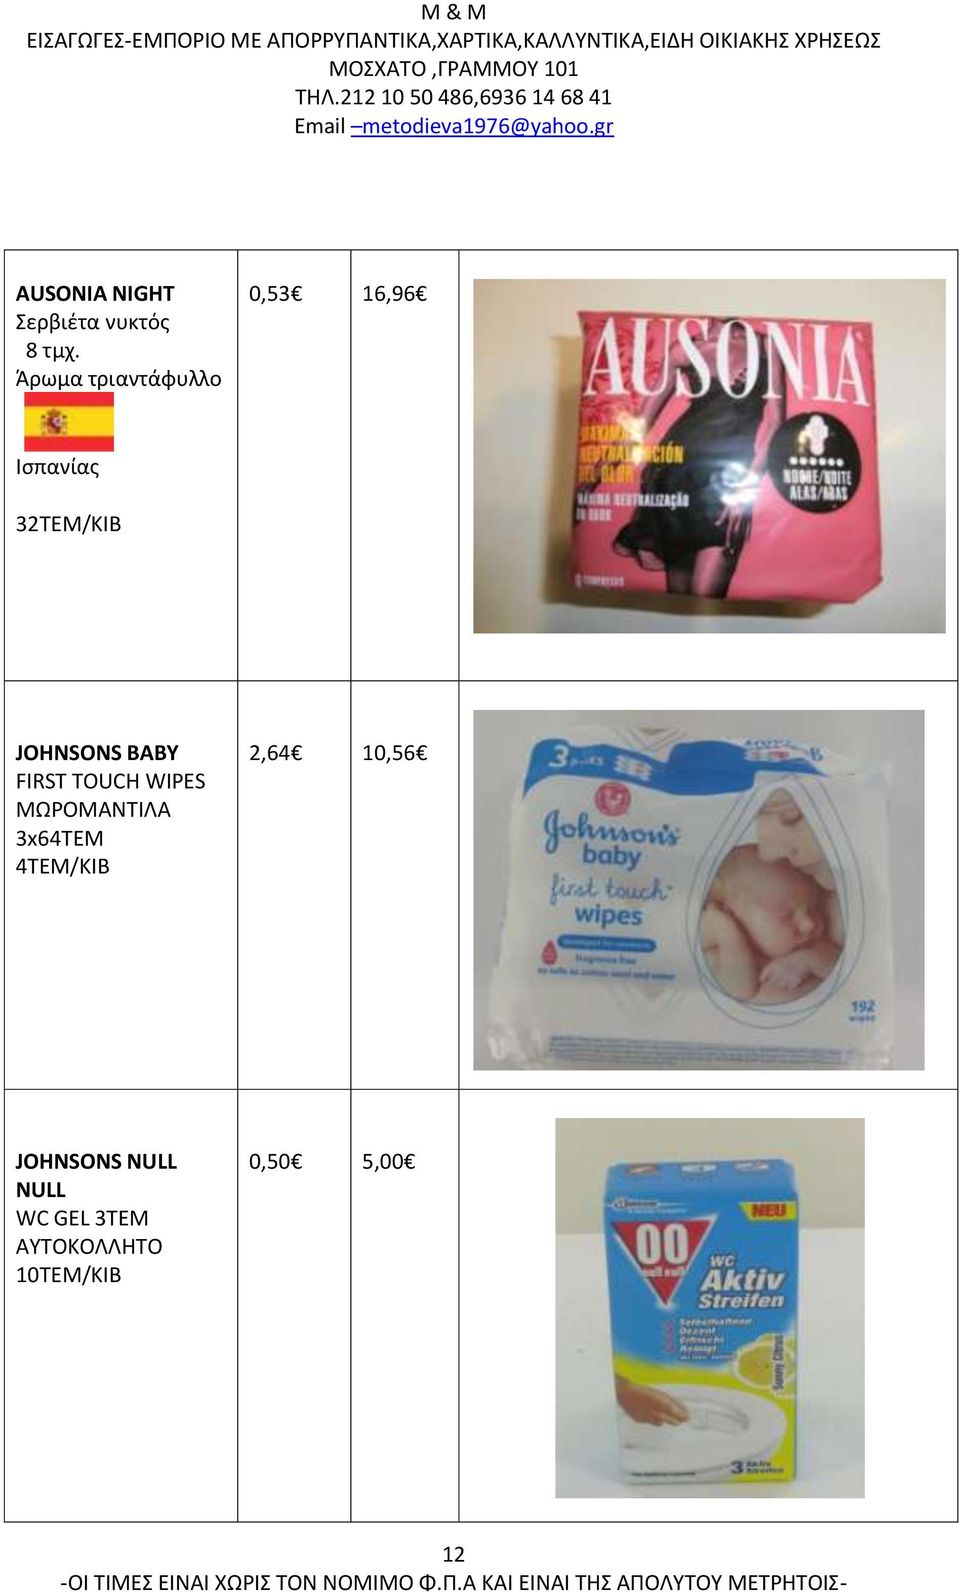 JOHNSONS BABY FIRST TOUCH WIPES ΜΩΡΟΜΑΝΤΙΛΑ 3x64ΤΕΜ